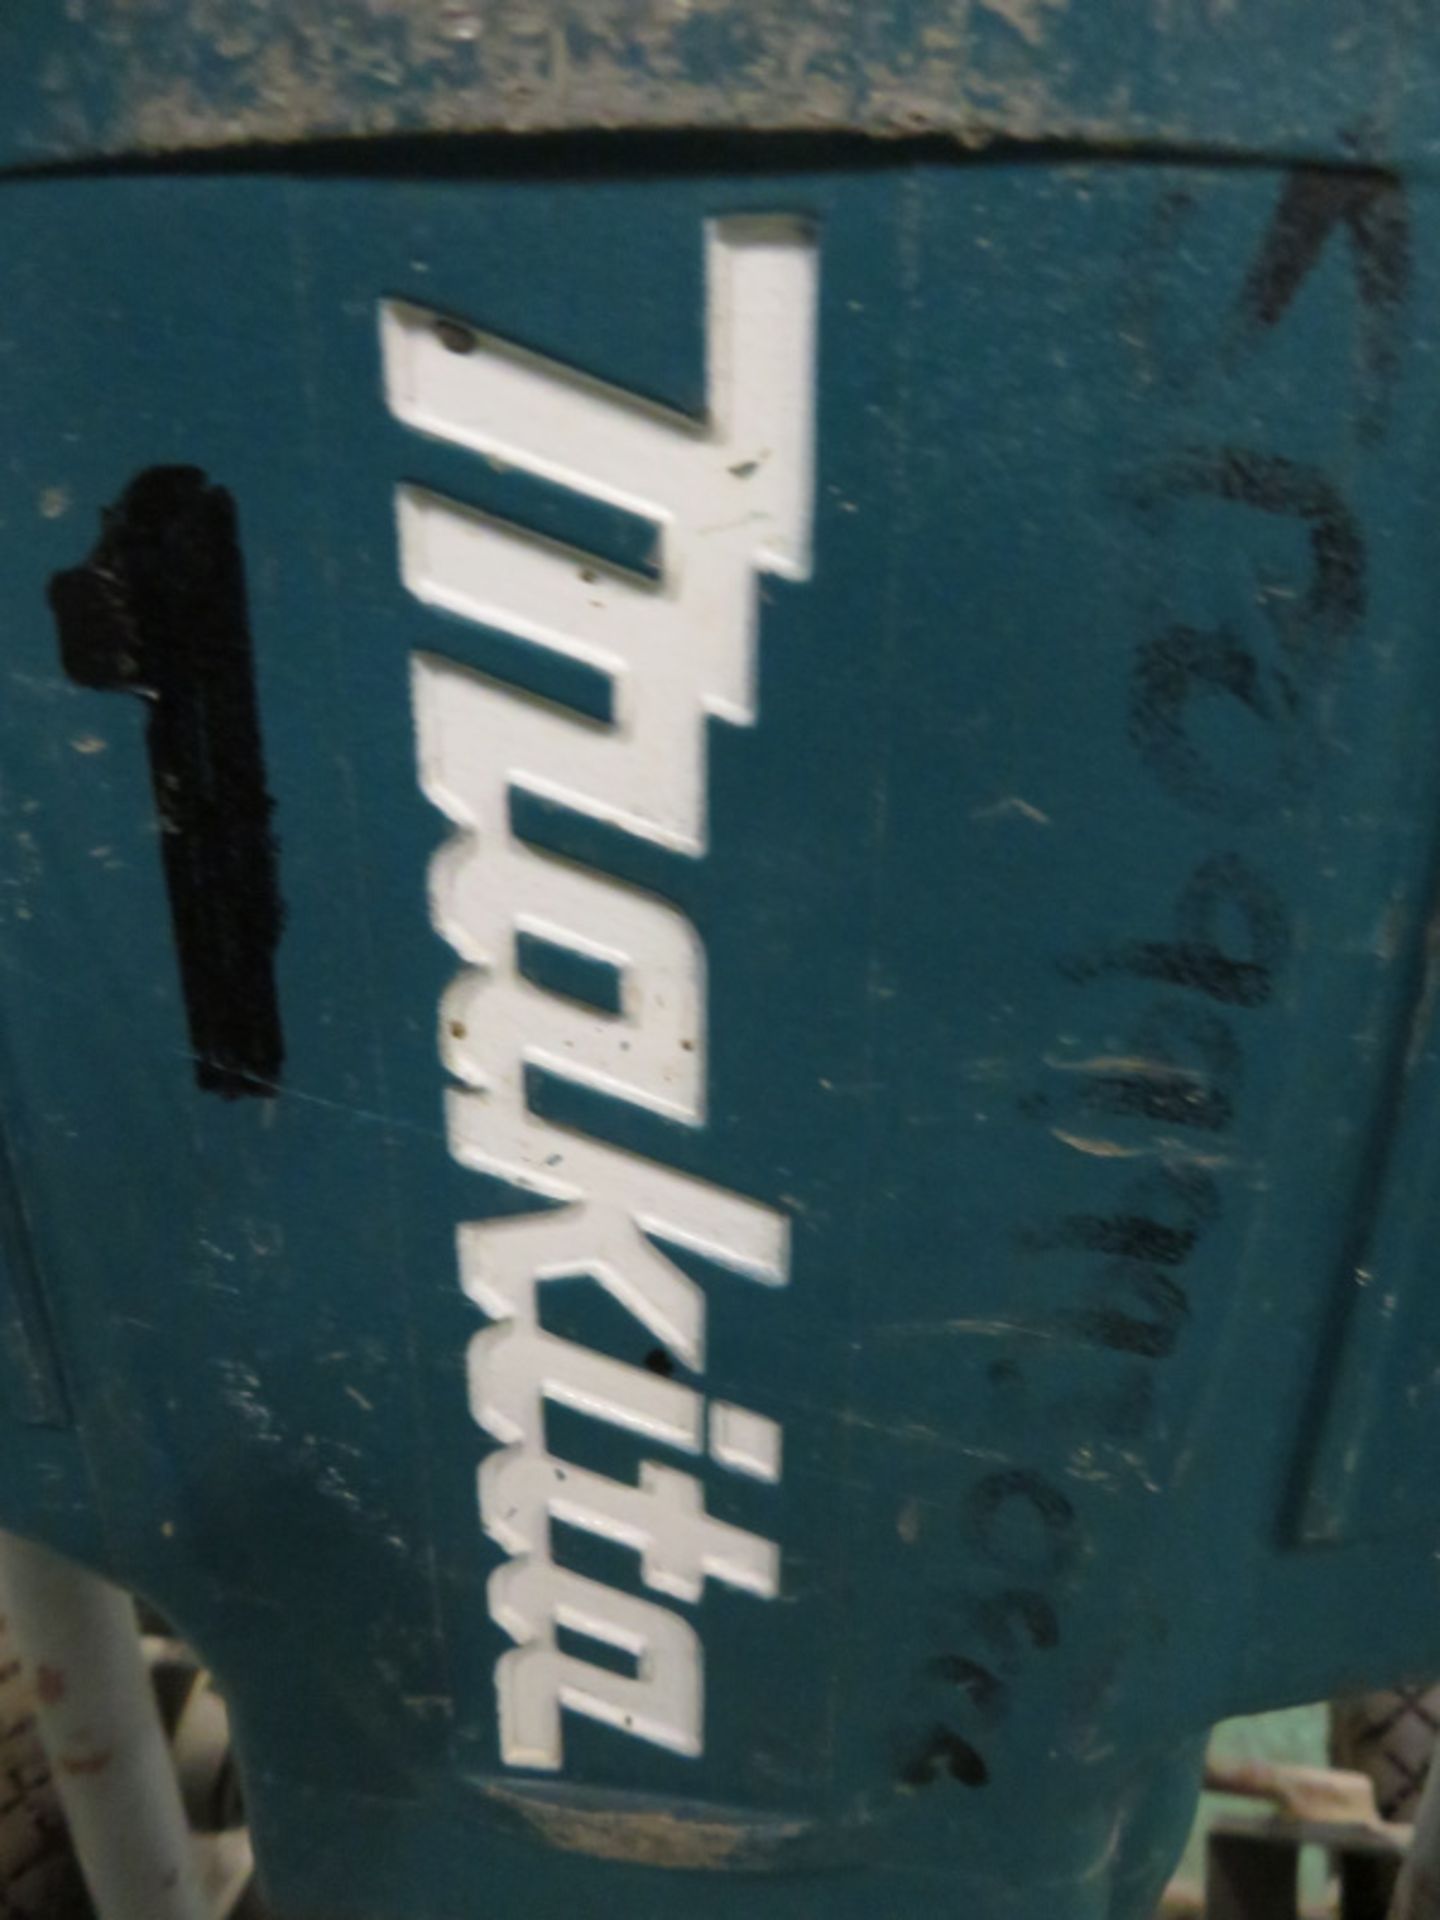 Makita HM1810 Portable Electric Hammer Drill + Trolley - damaged wheel on trolley need repair - Image 4 of 4